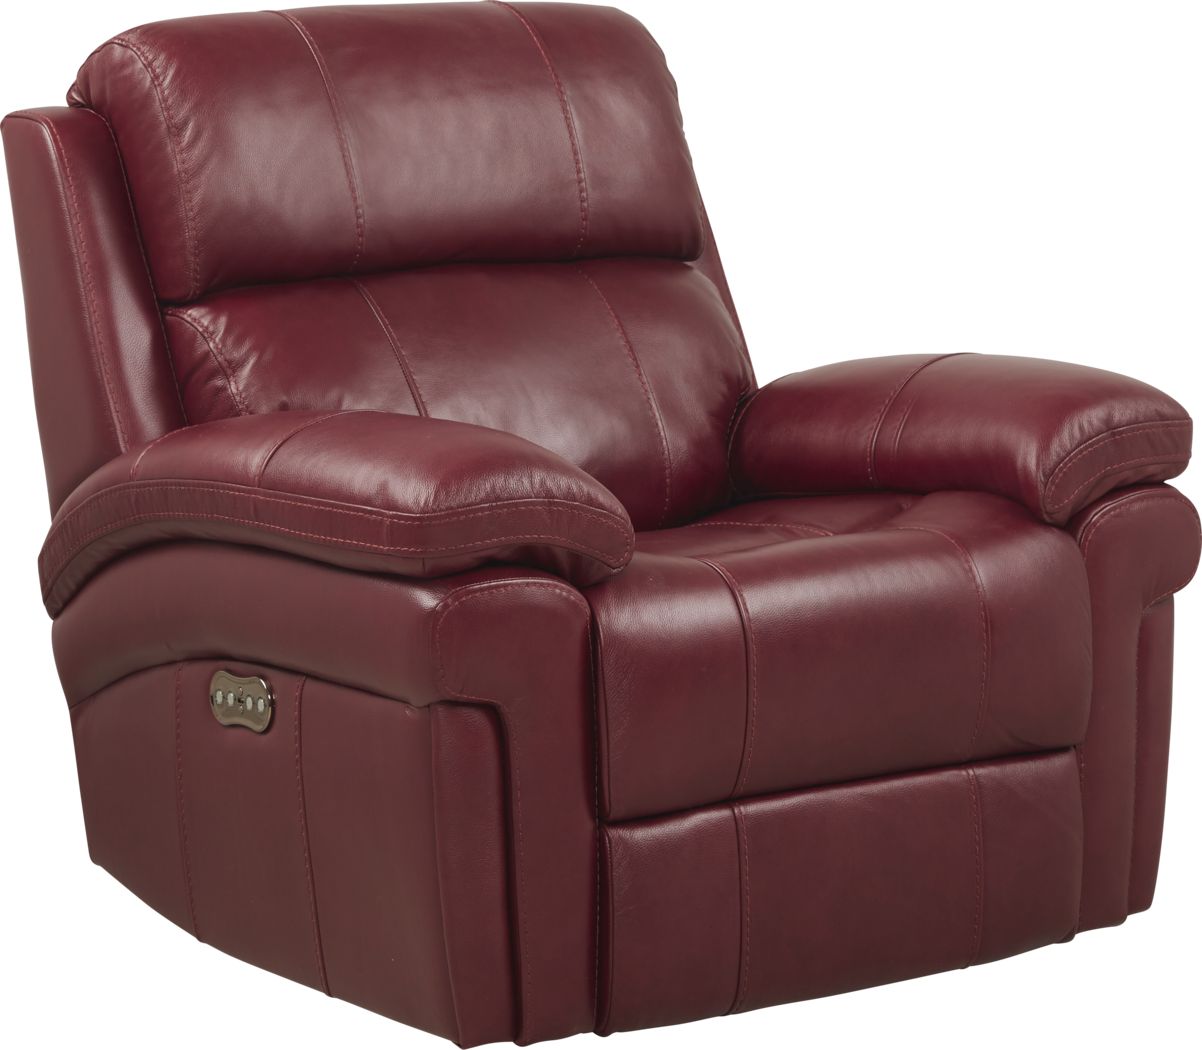 Red Recliner Chair CHA-69-705 